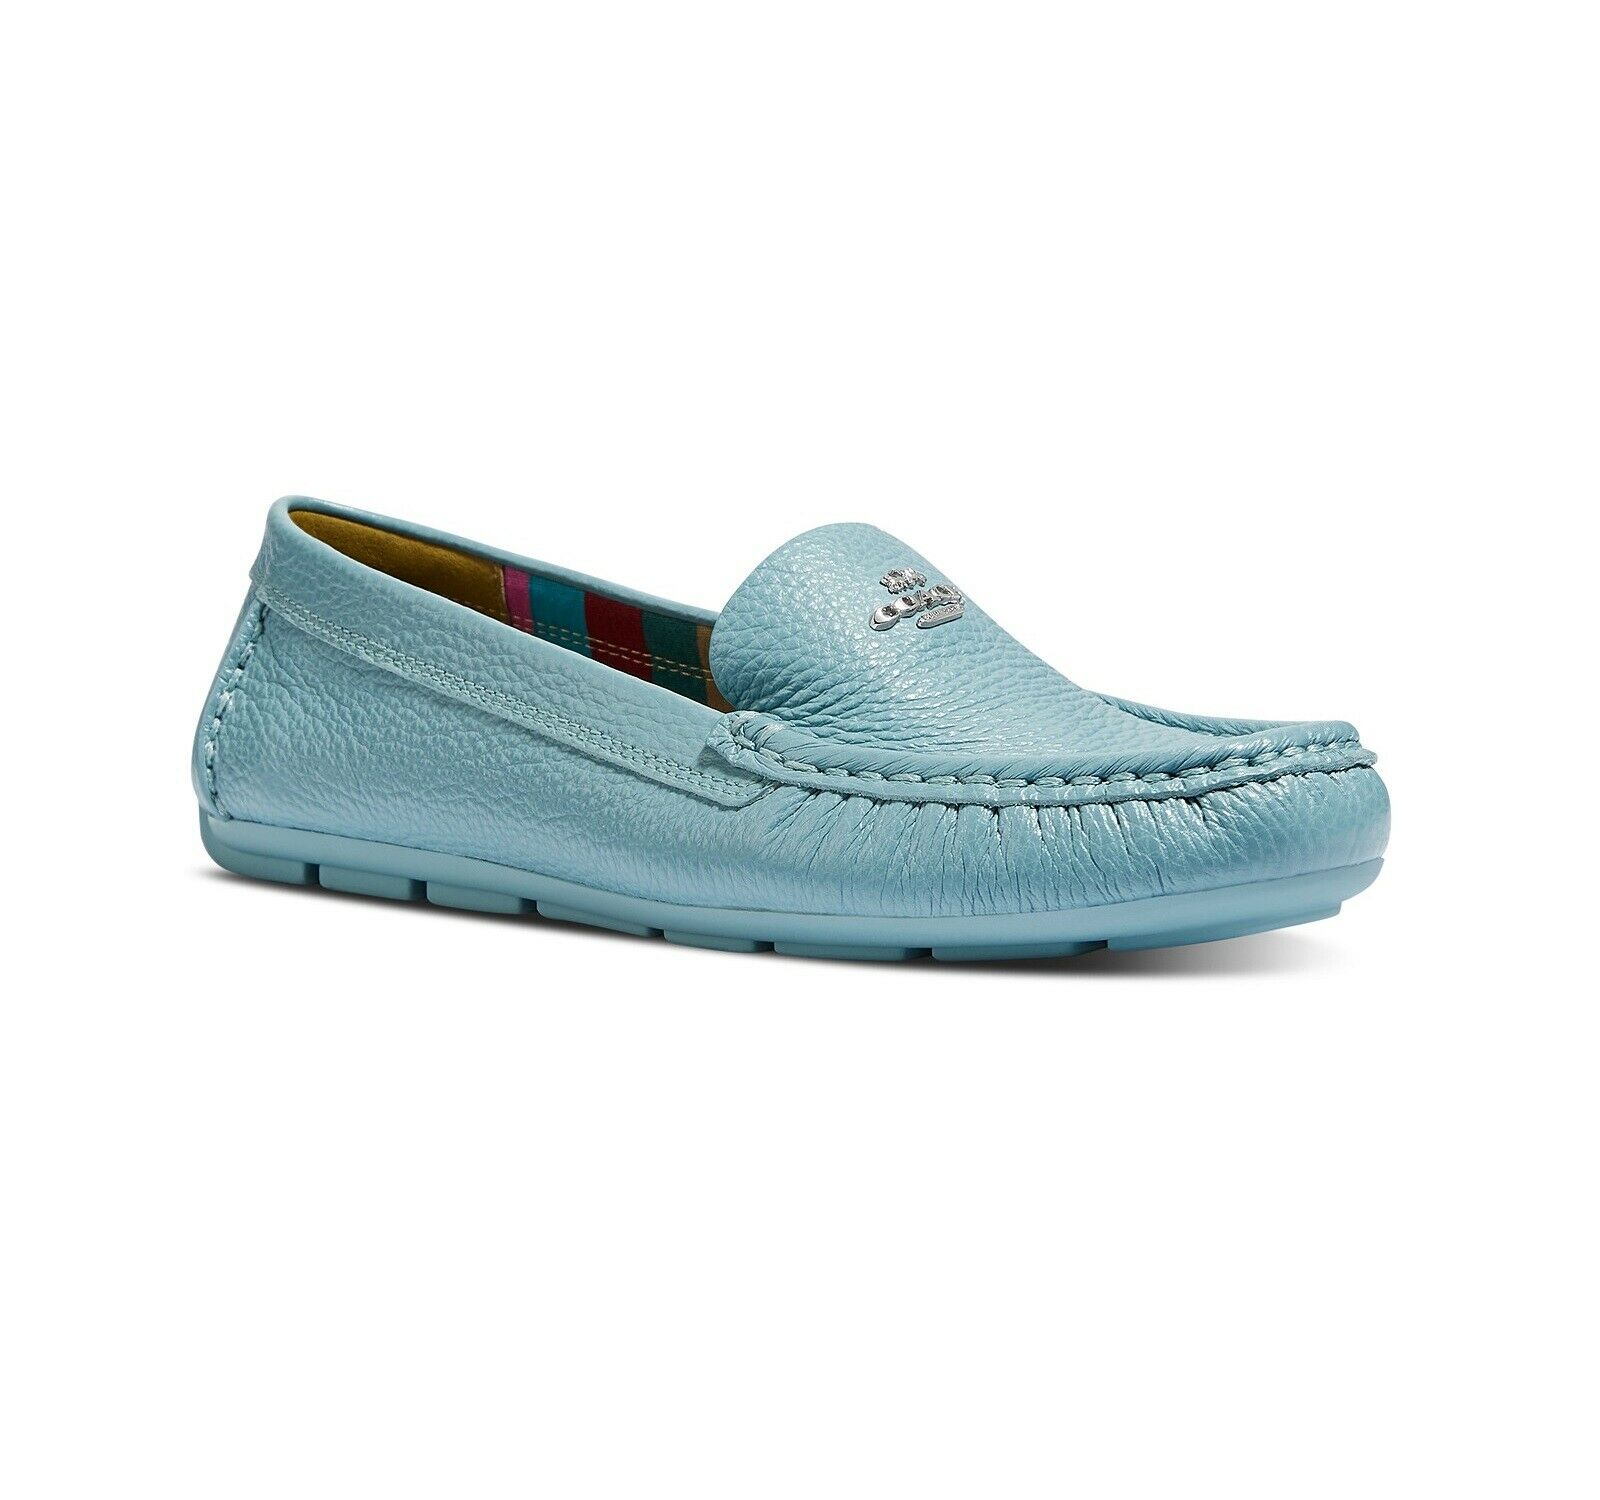 COACH Women's Marley Driver Leather Loafers, Aquamarine (Size 11)